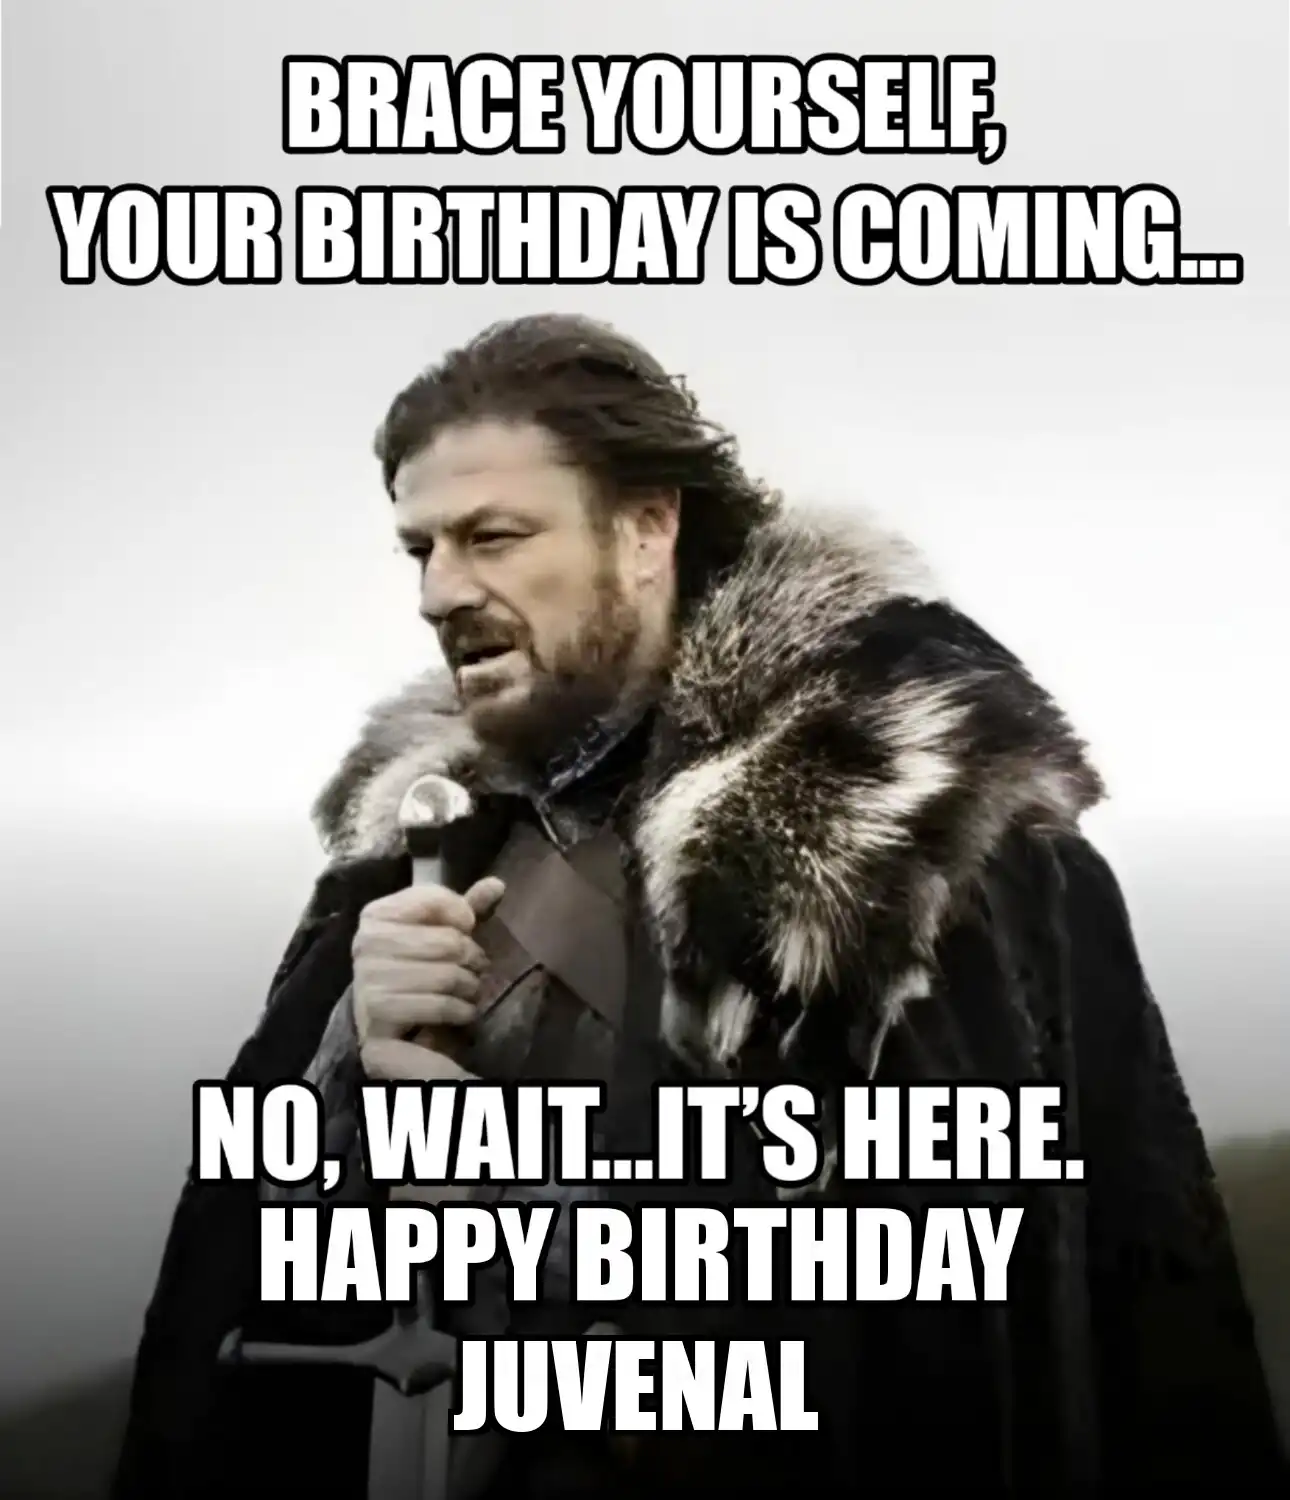 Happy Birthday Juvenal Brace Yourself Your Birthday Is Coming Meme